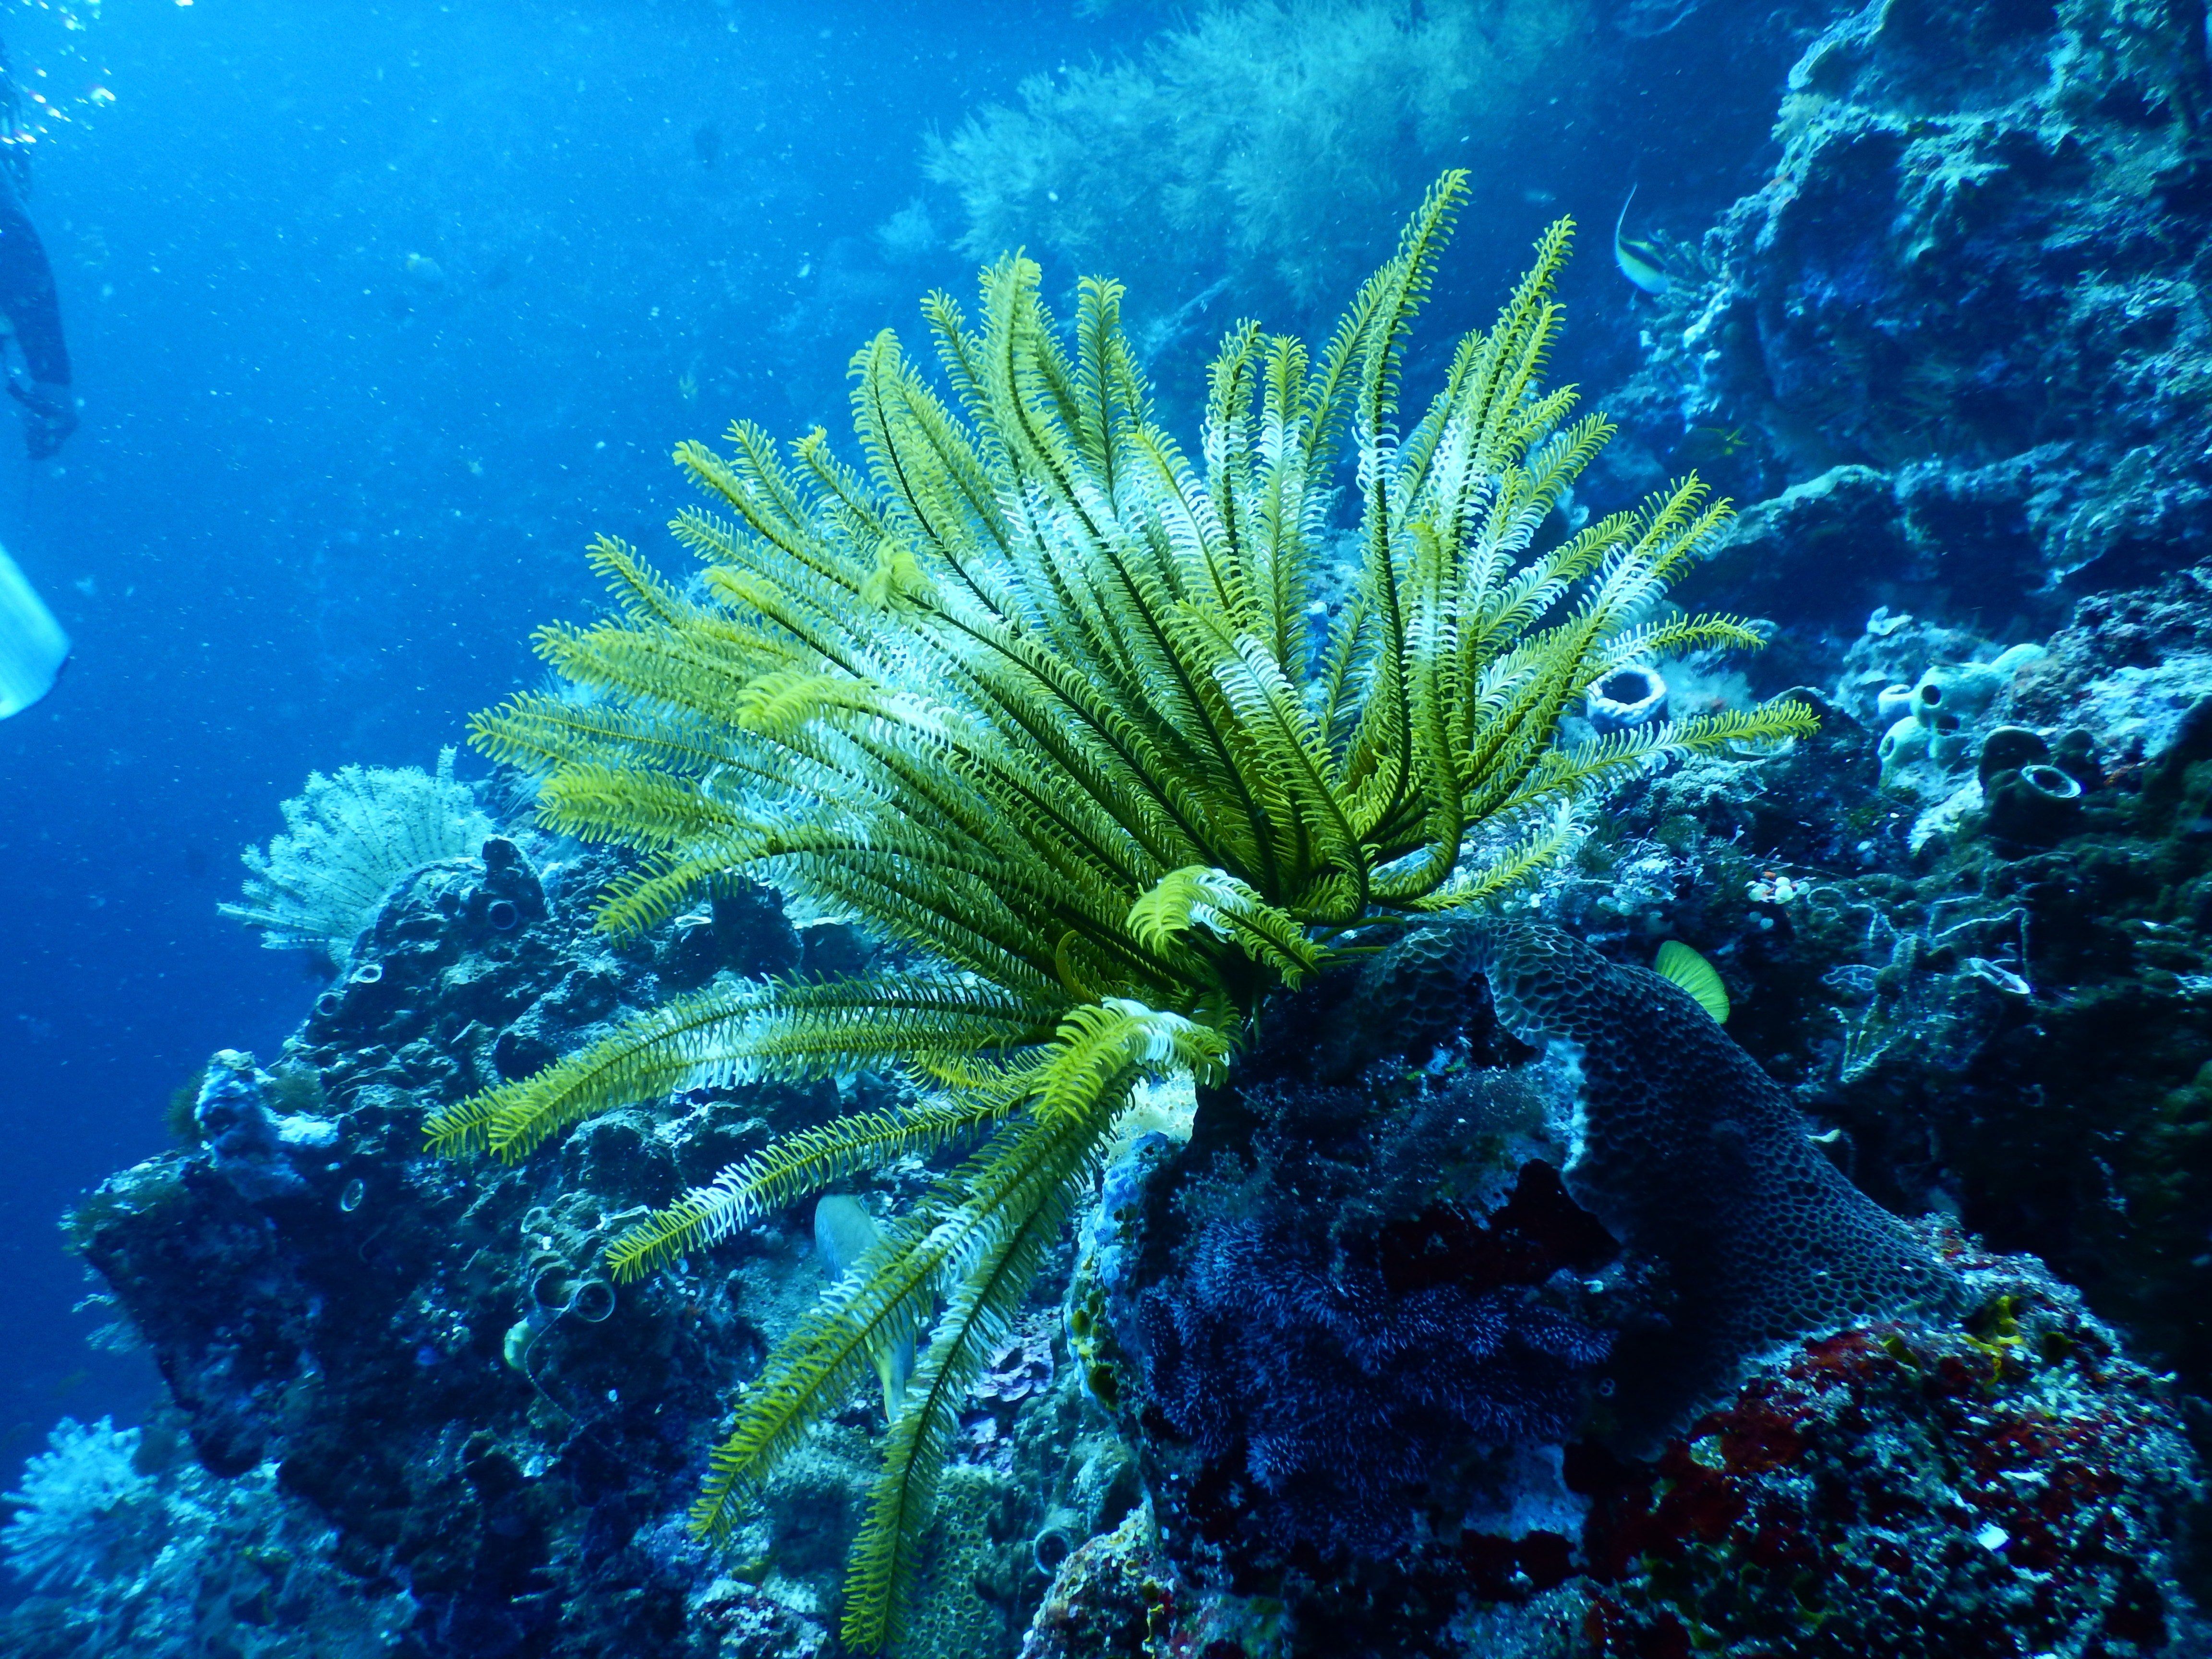 Underwater reef with plants.